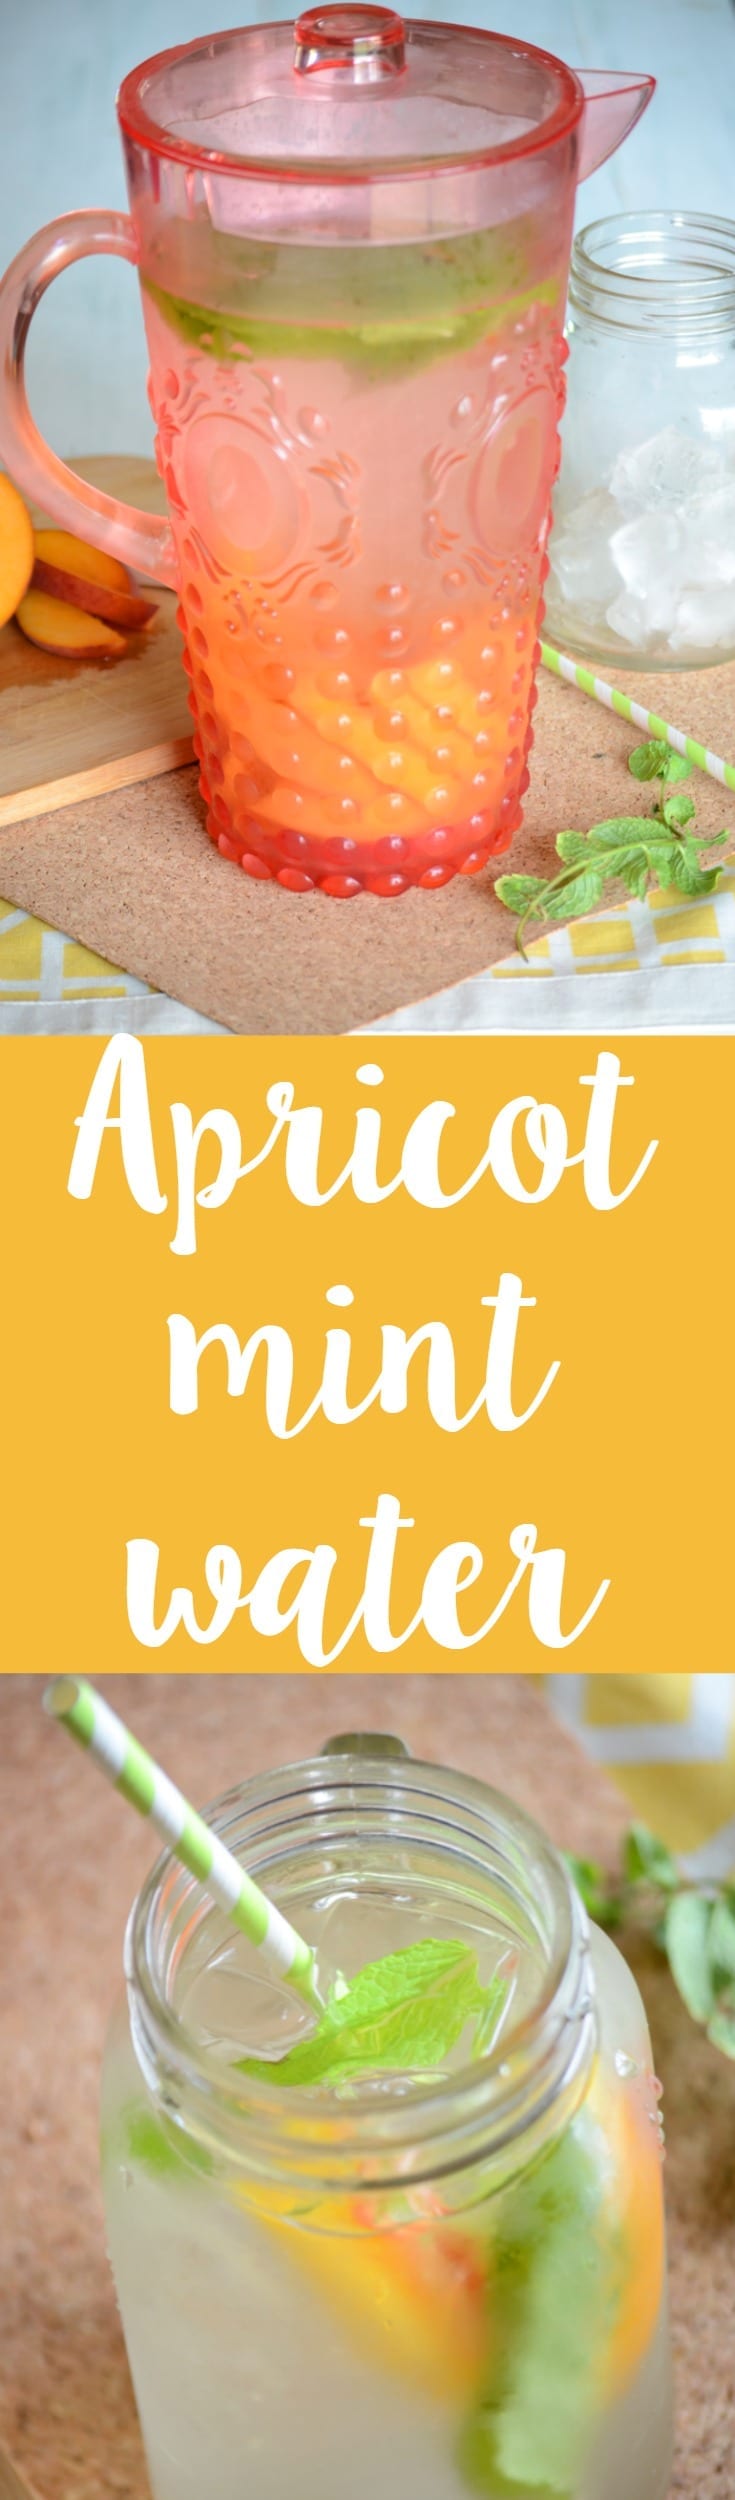 Apricot mint infused water